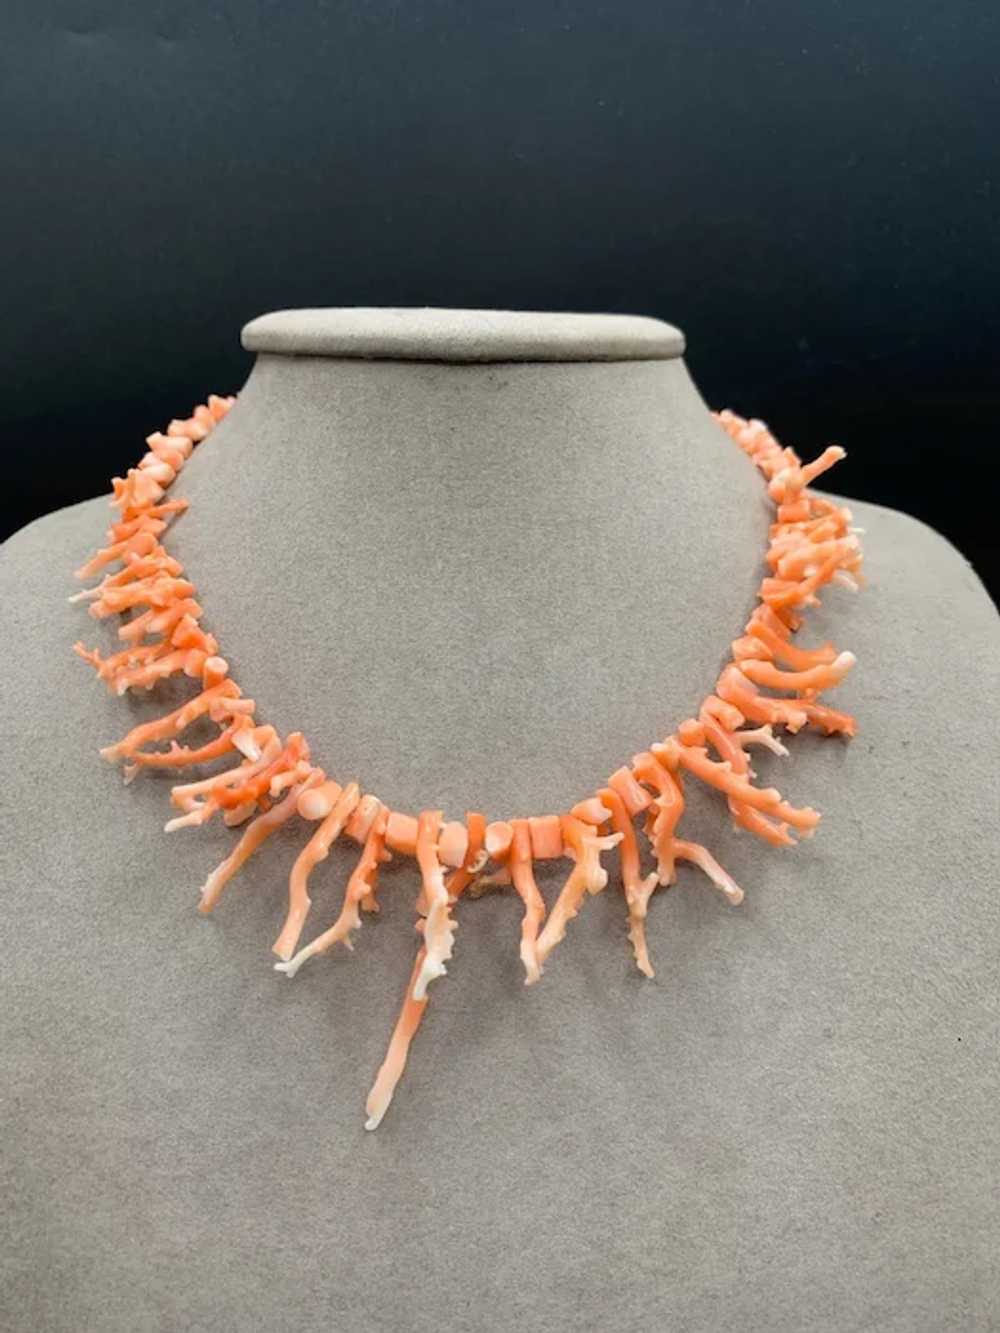 Branch Coral Necklace Pink Salmon Graduated Bib n… - image 3